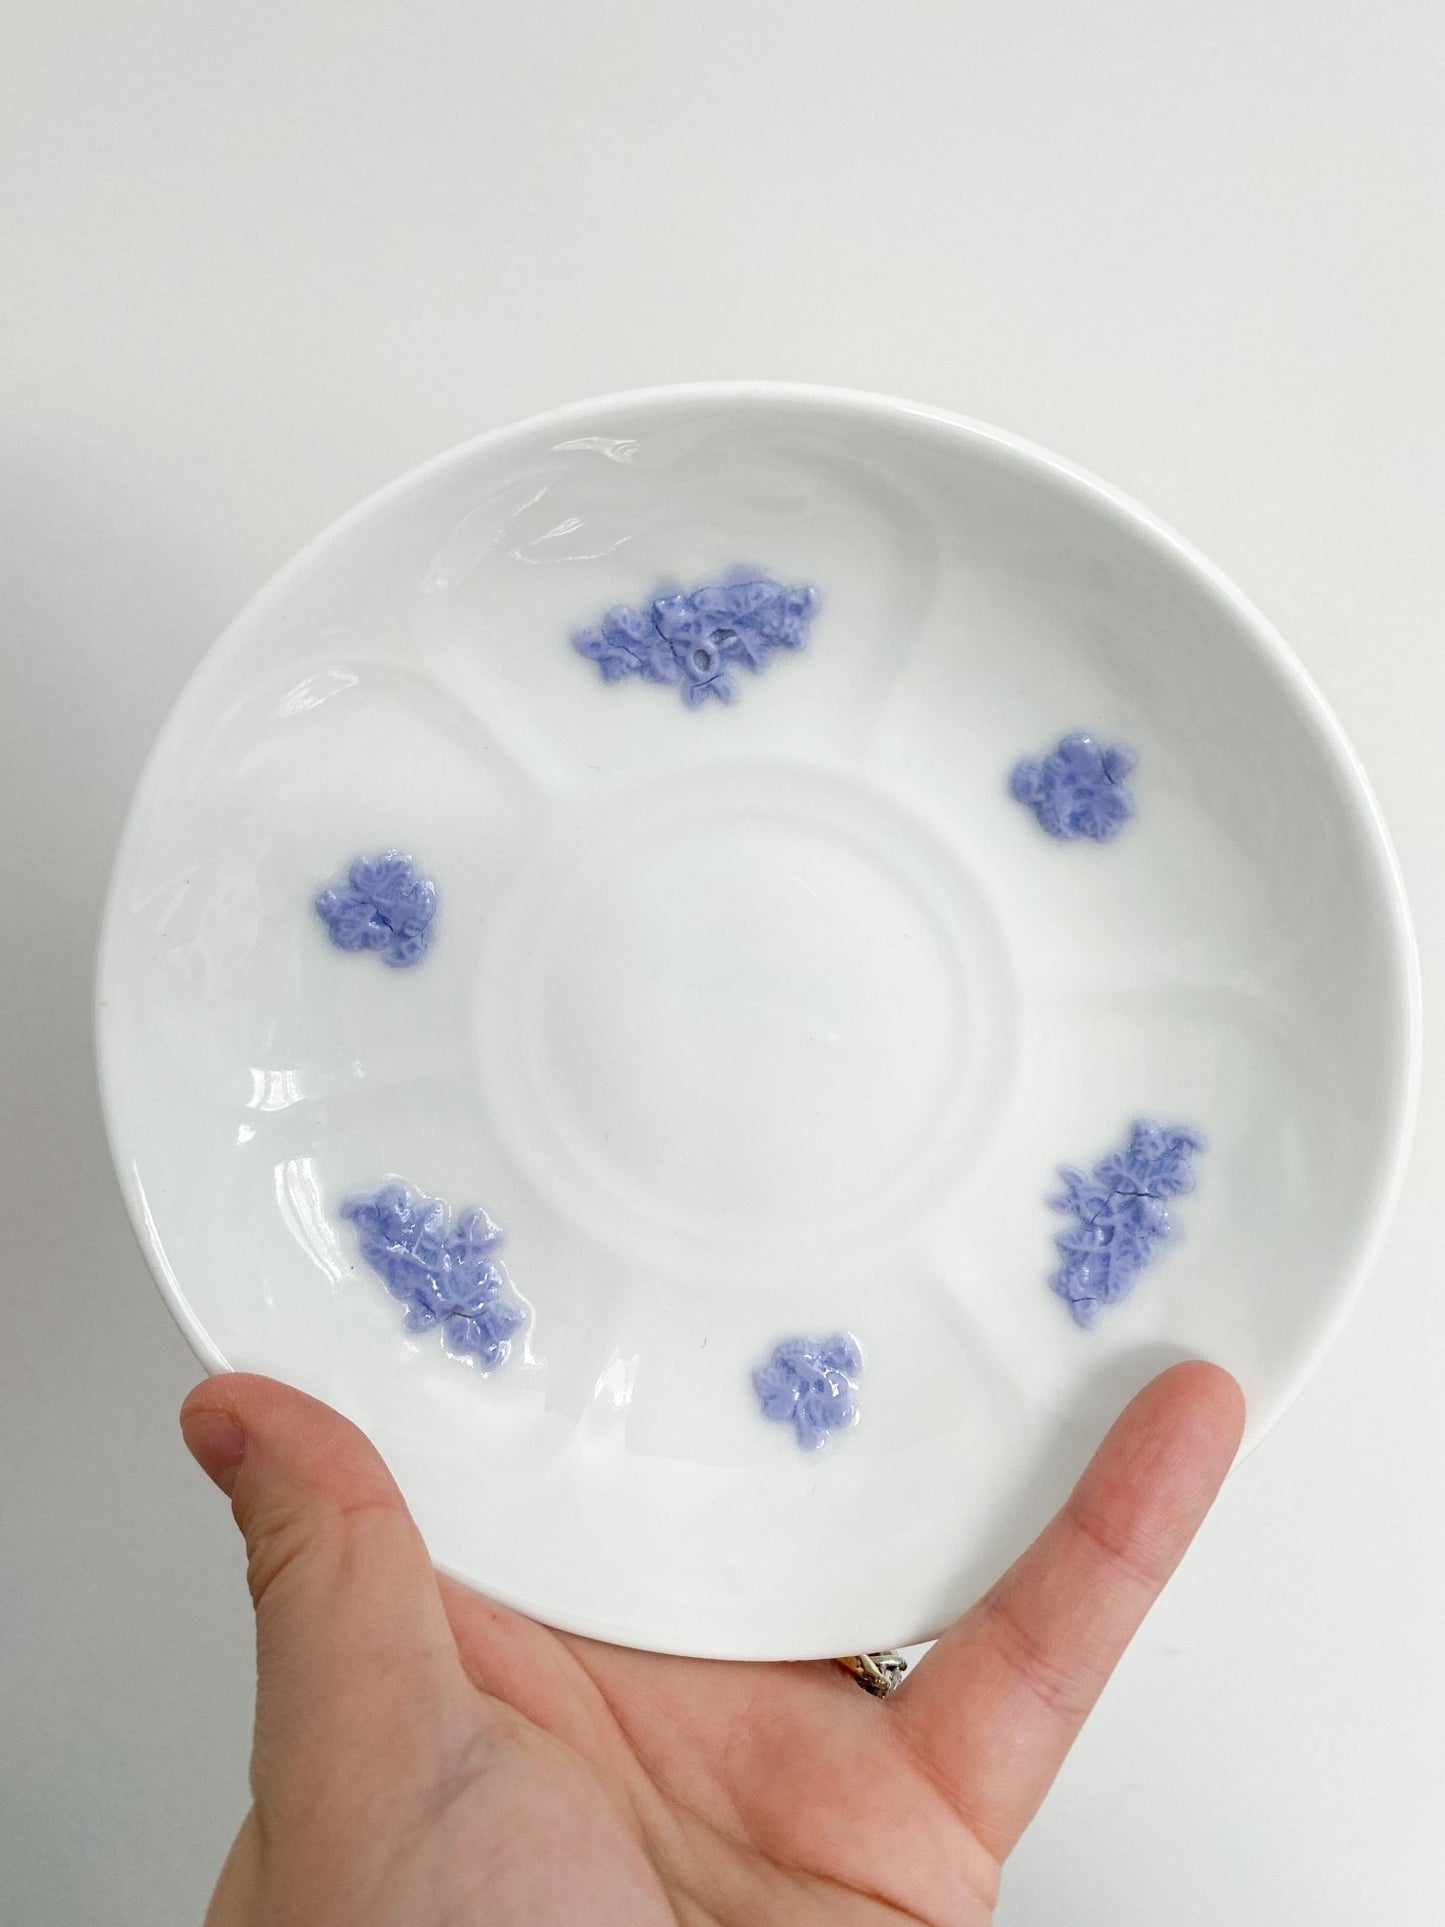 A hand holds the saucer in full view against a white backdrop. The saucer shows the violet flower details, 6 total with 3 smaller flowers and 3 larger flowers.